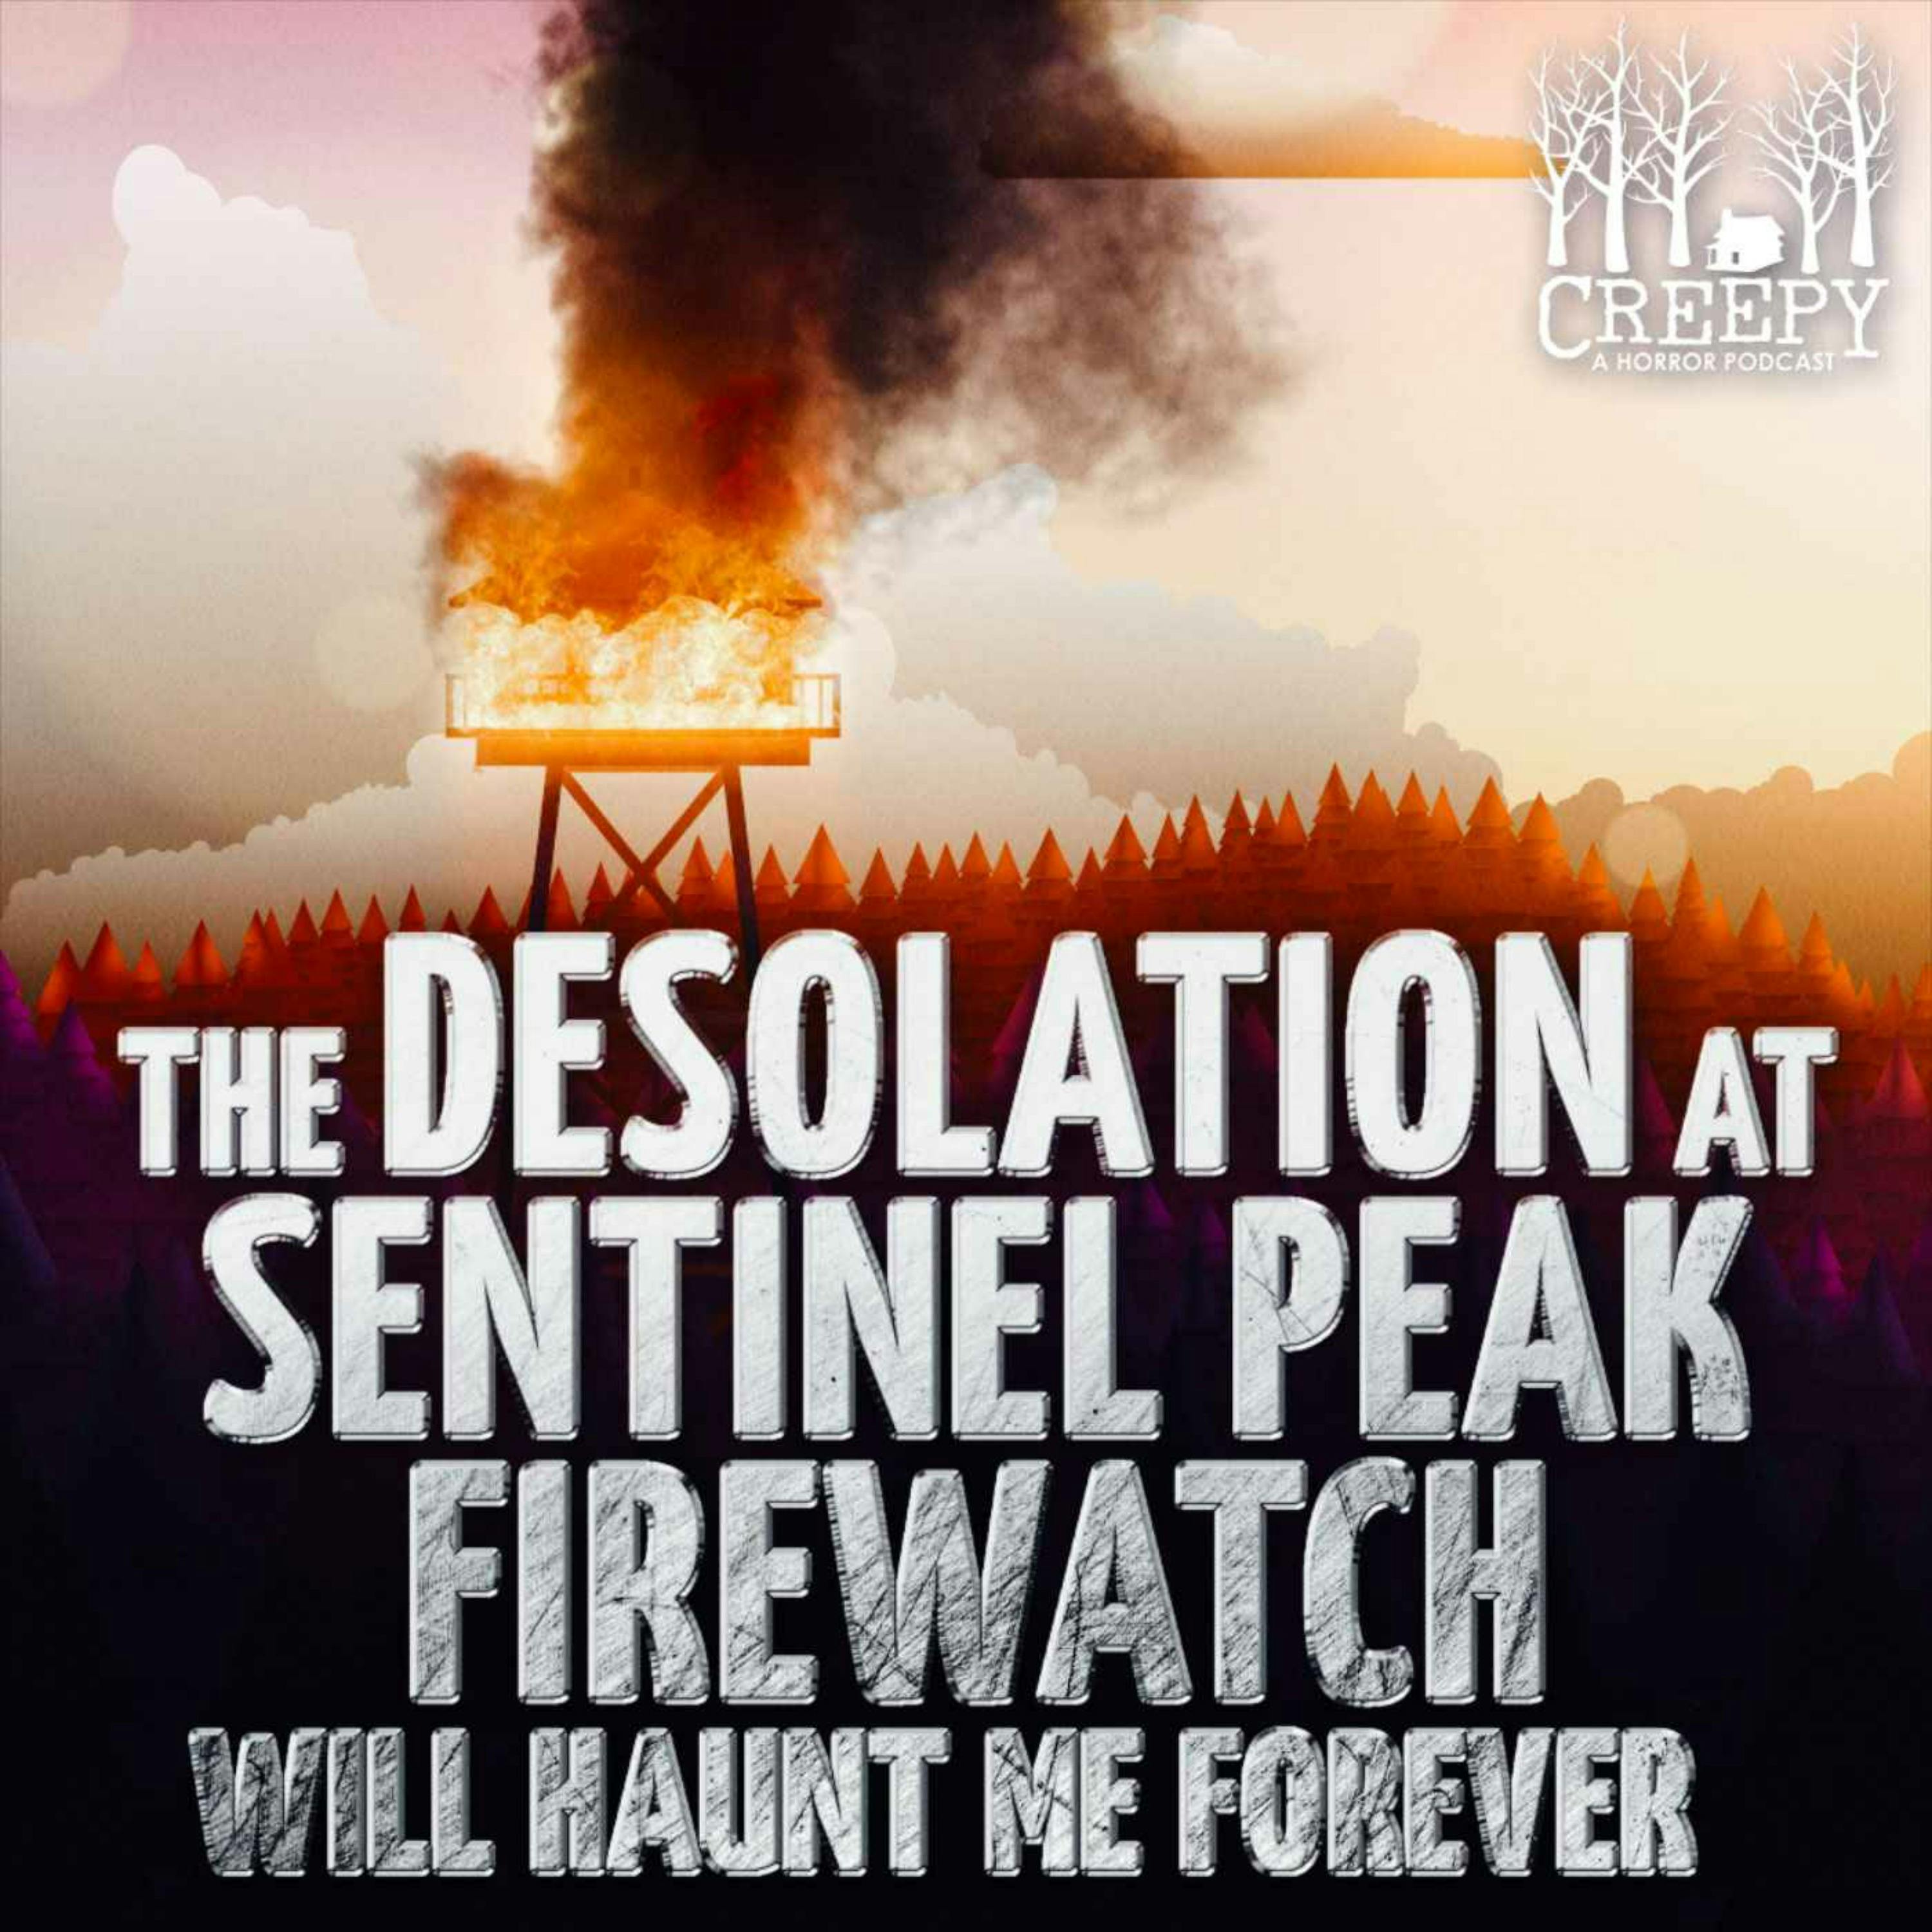 The Desolation of Sentinel Peak Firewatch Will Haunt Me Forever